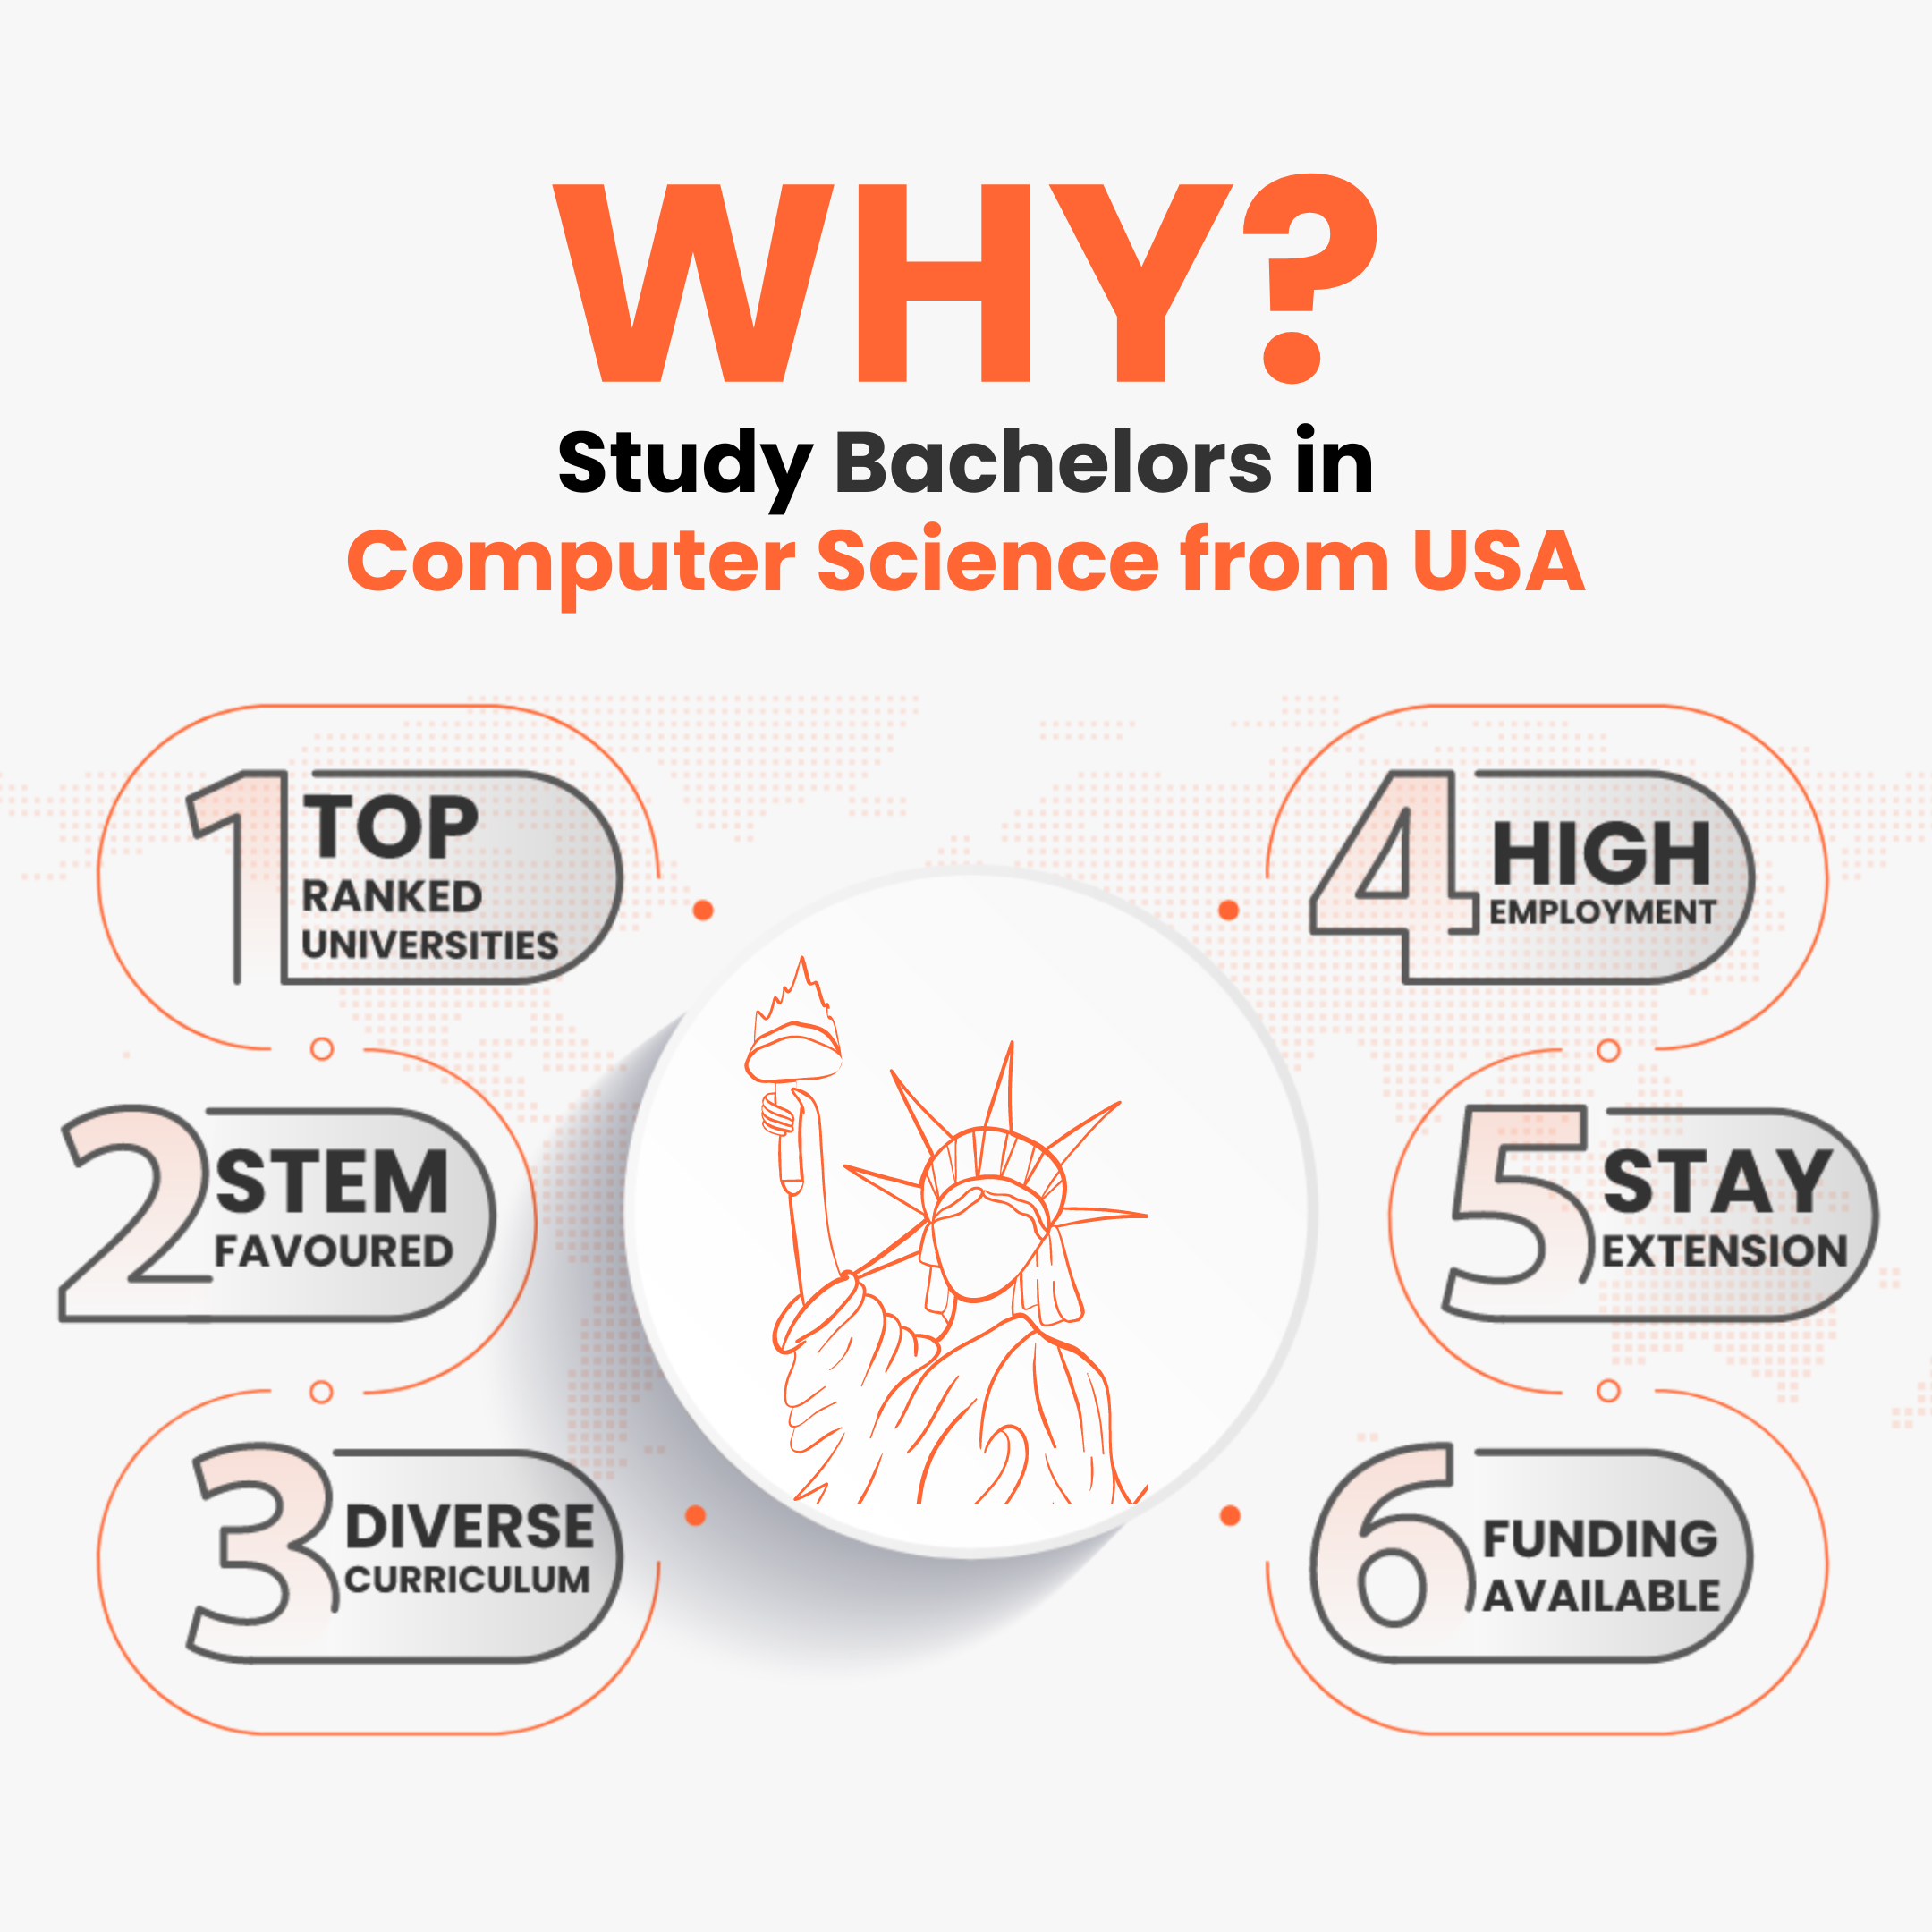 Study Abroad Study in USA Why study bachelors in computer science in the USA